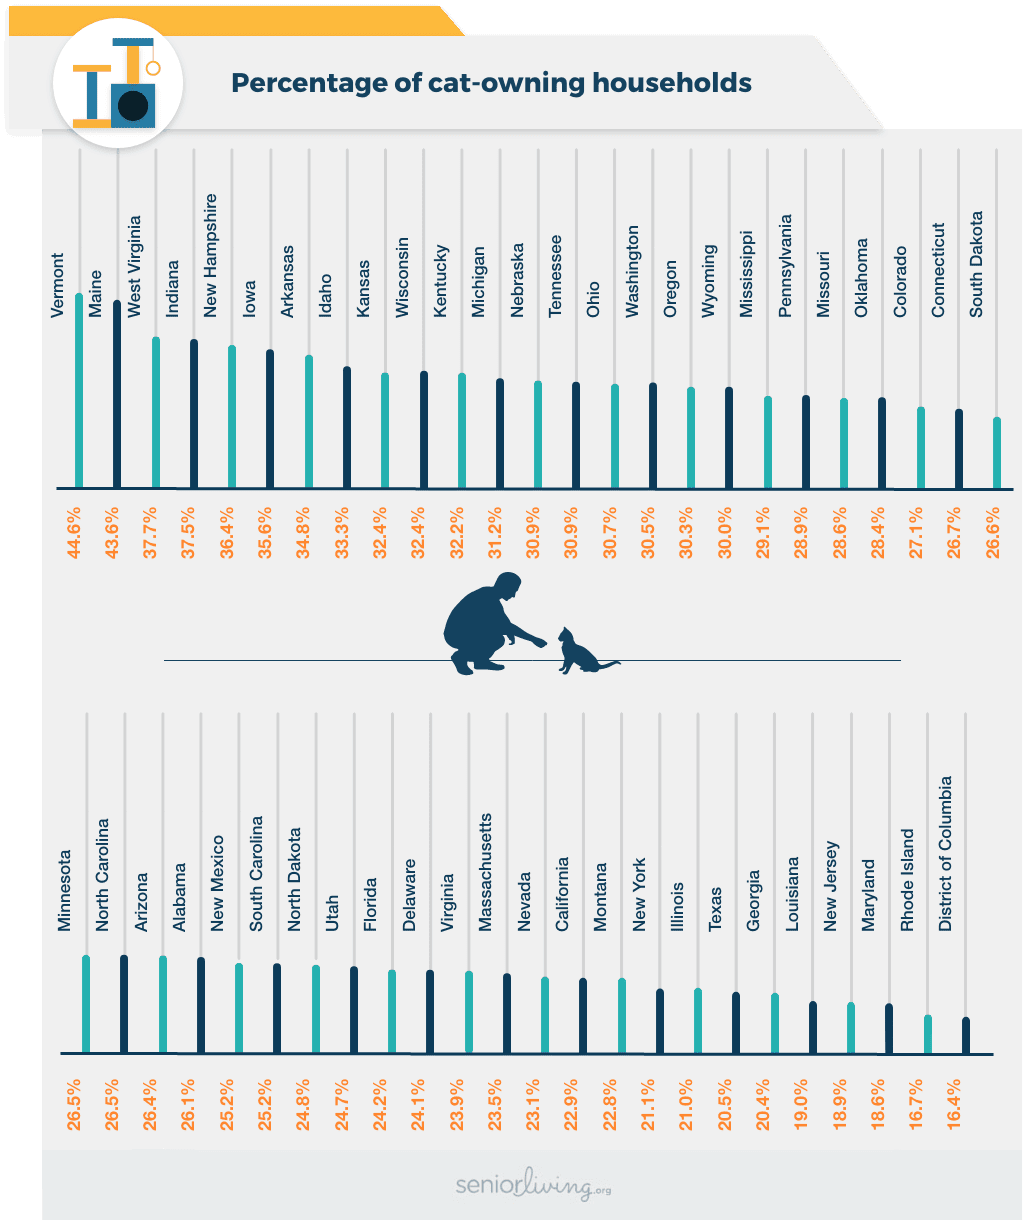 Percentage of cat-owning households